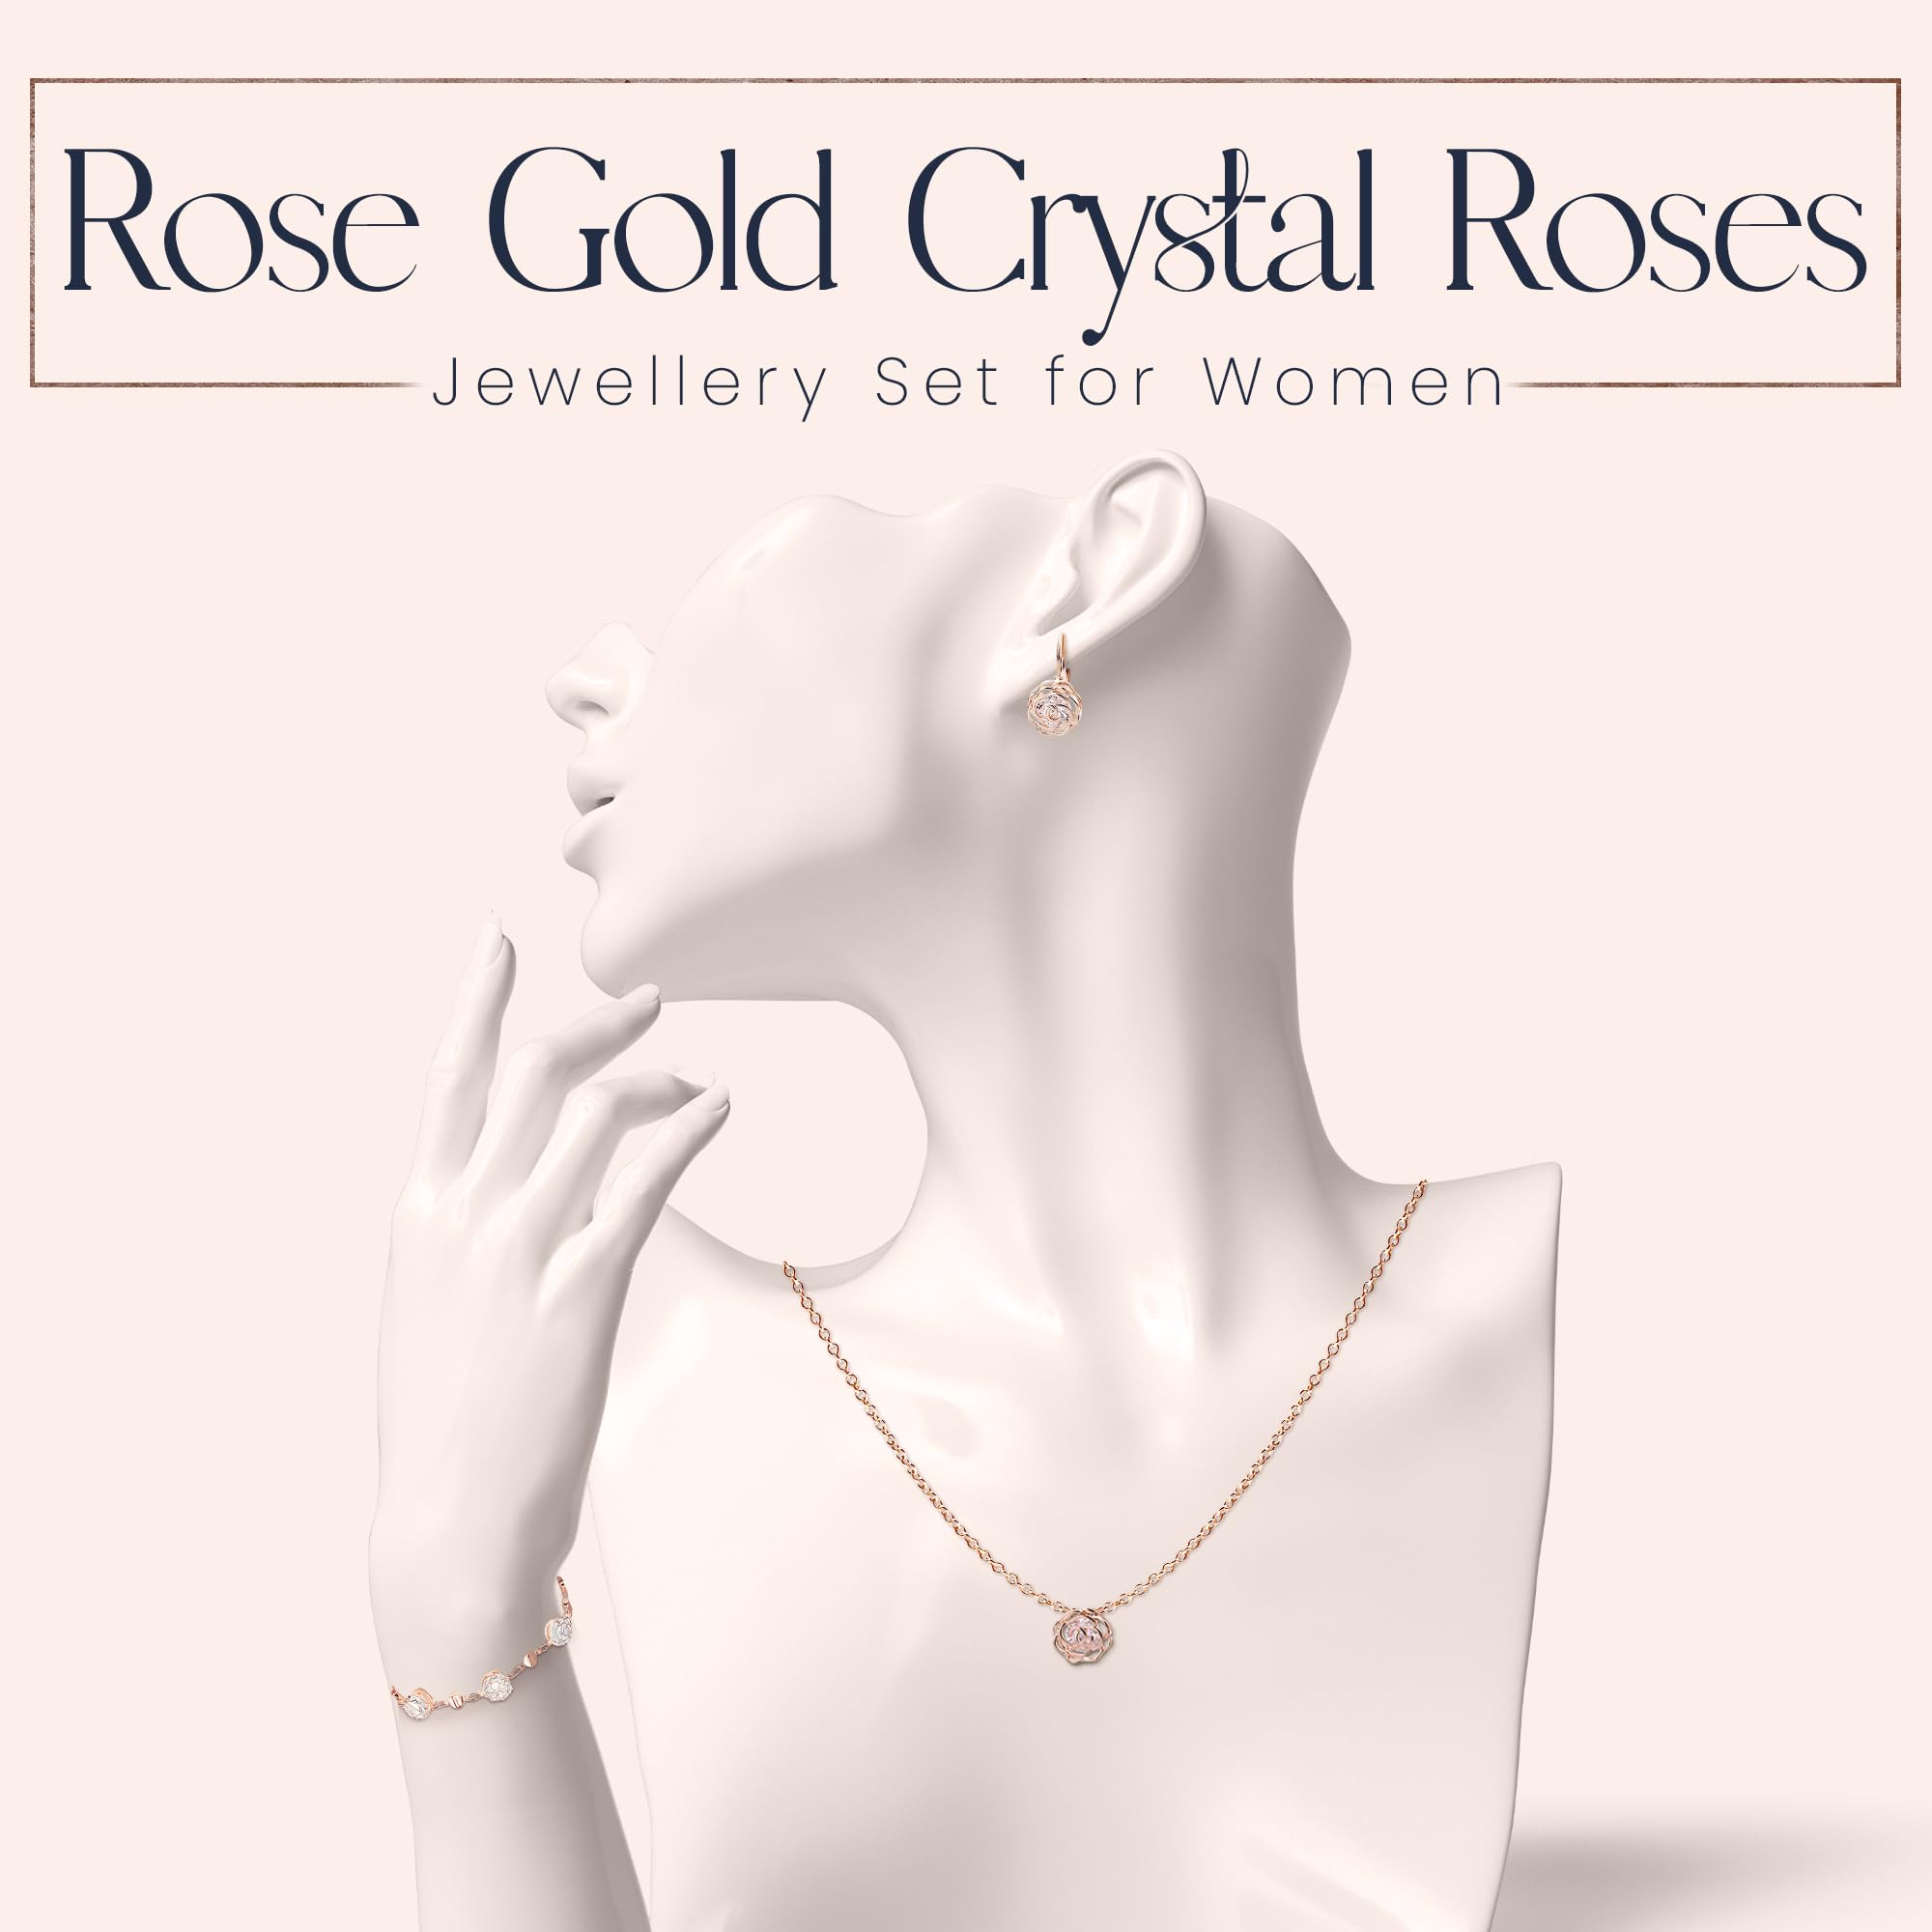 Crystalline Azuria Women 18 ct Gold Plated White Crystal Roses Flower Set Necklace Earrings Bracelet for Women Wedding Party Bridal Bridesmaid Accessories